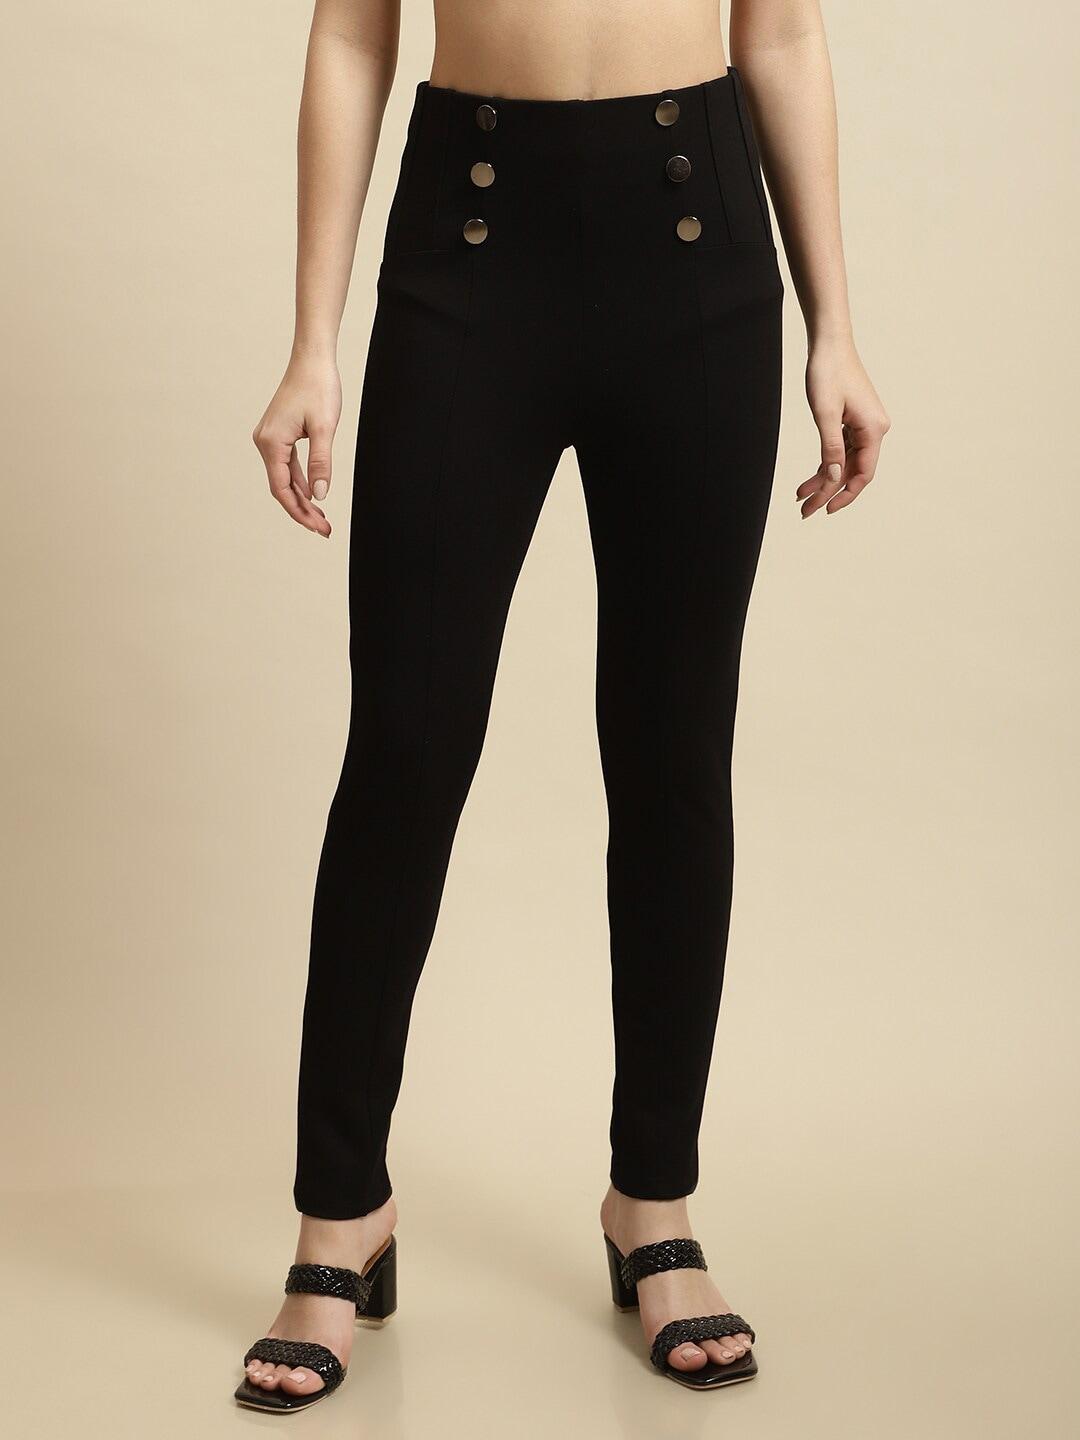 tag-7-women-ankle-length-skinny-fit-treggings